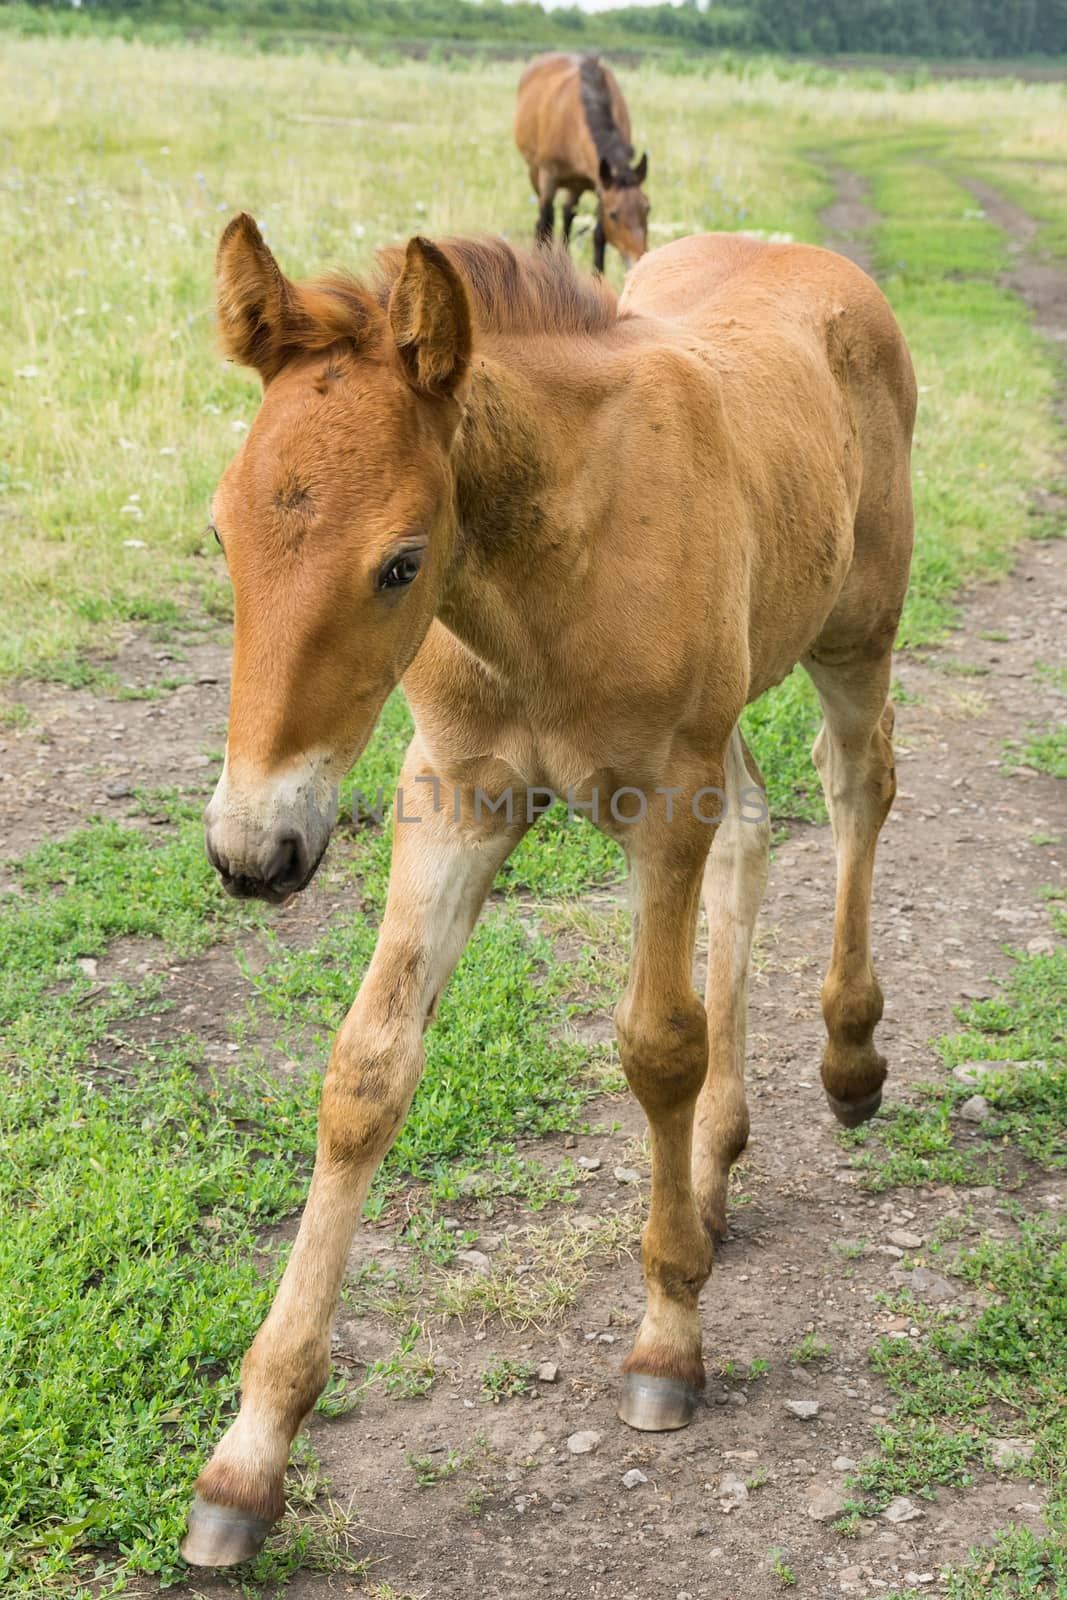 The photo depicts a smiling foal in the meadow